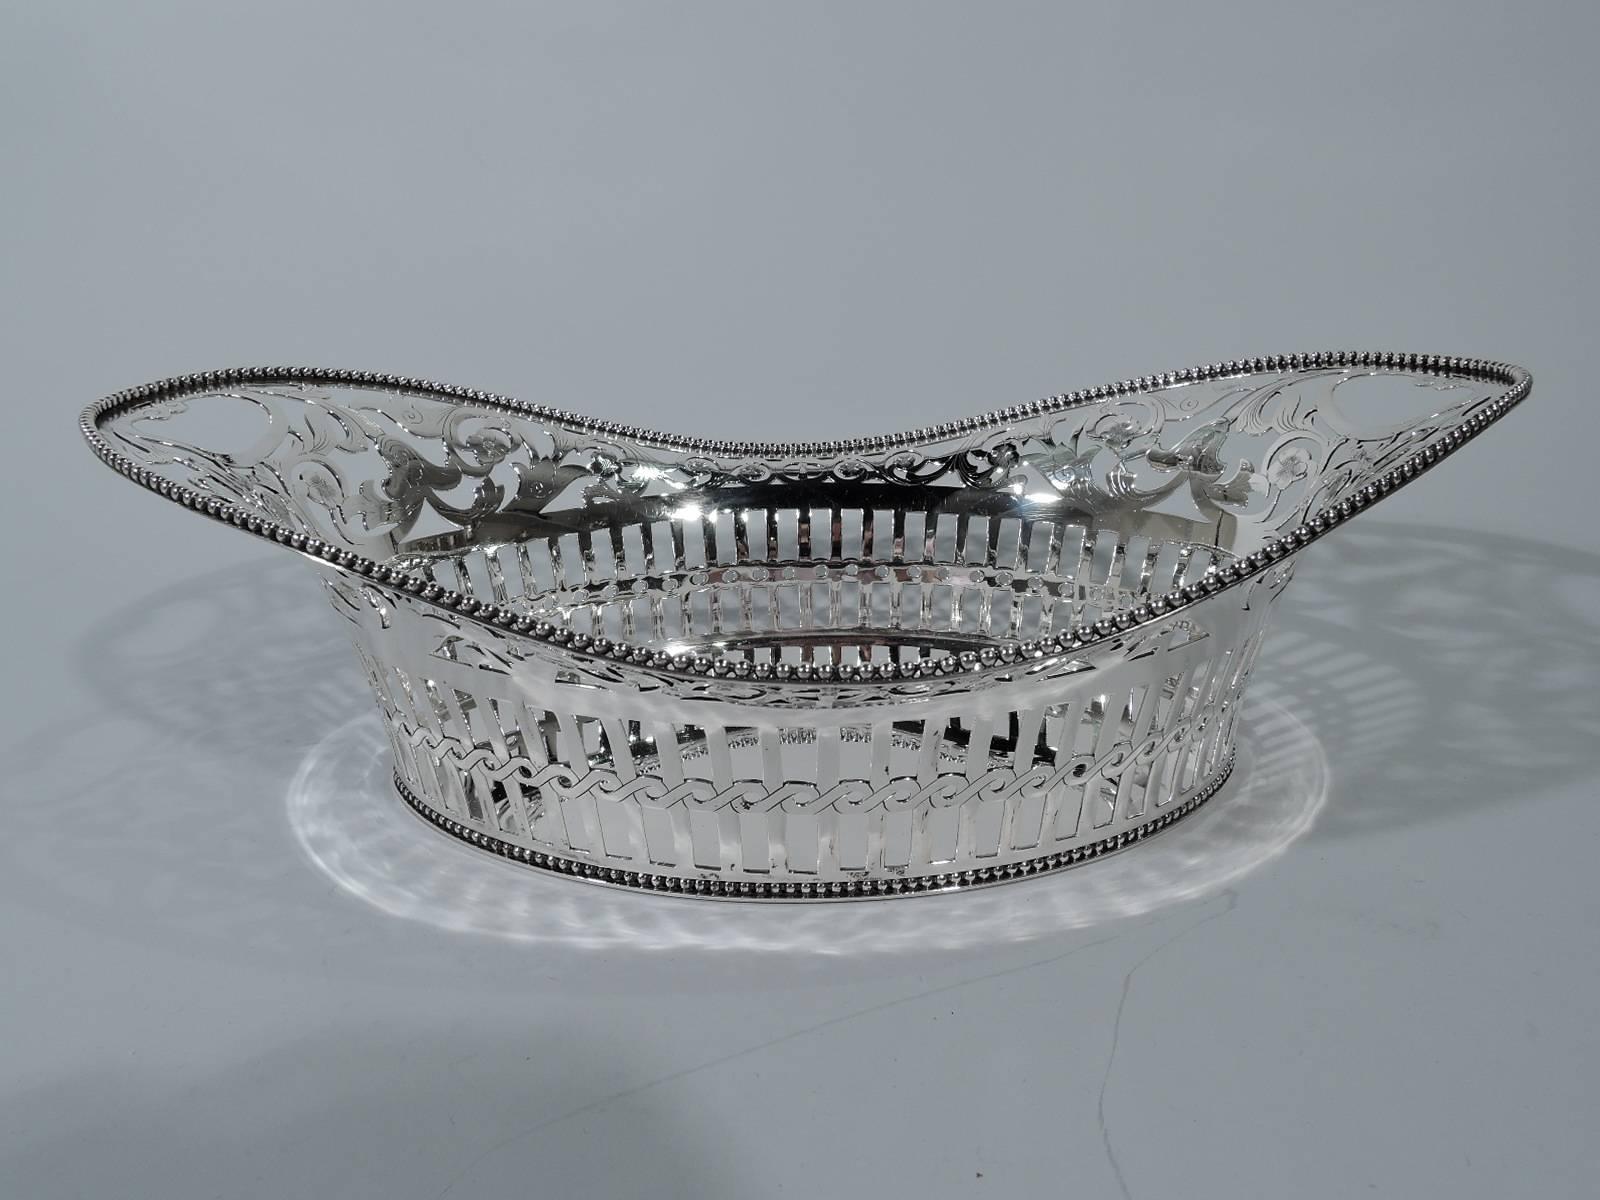 Victorian sterling silver basket. Made by Tiffany & Co. in New York, circa 1884. Solid oval well and swooping rim. Sides pierced: Colonnade bisected with guilloche band and surmounted by fluid scrollwork and flowers heightened with engraving. Open